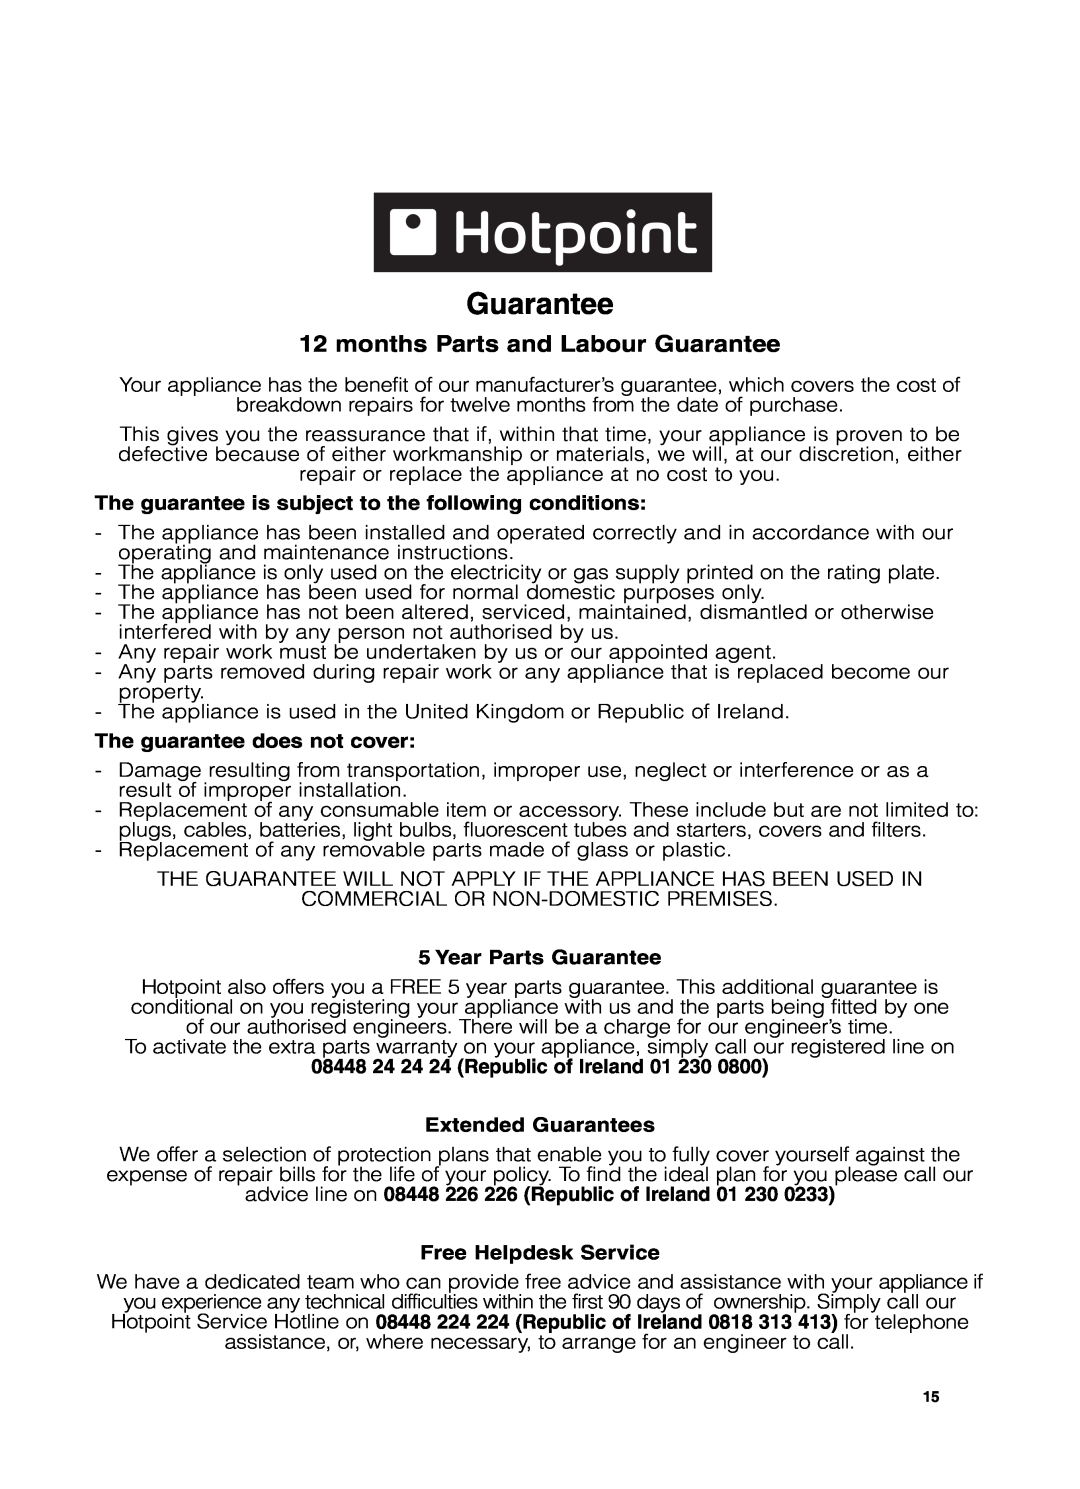 Hotpoint TVF770 manual months Parts and Labour Guarantee, The guarantee is subject to the following conditions 